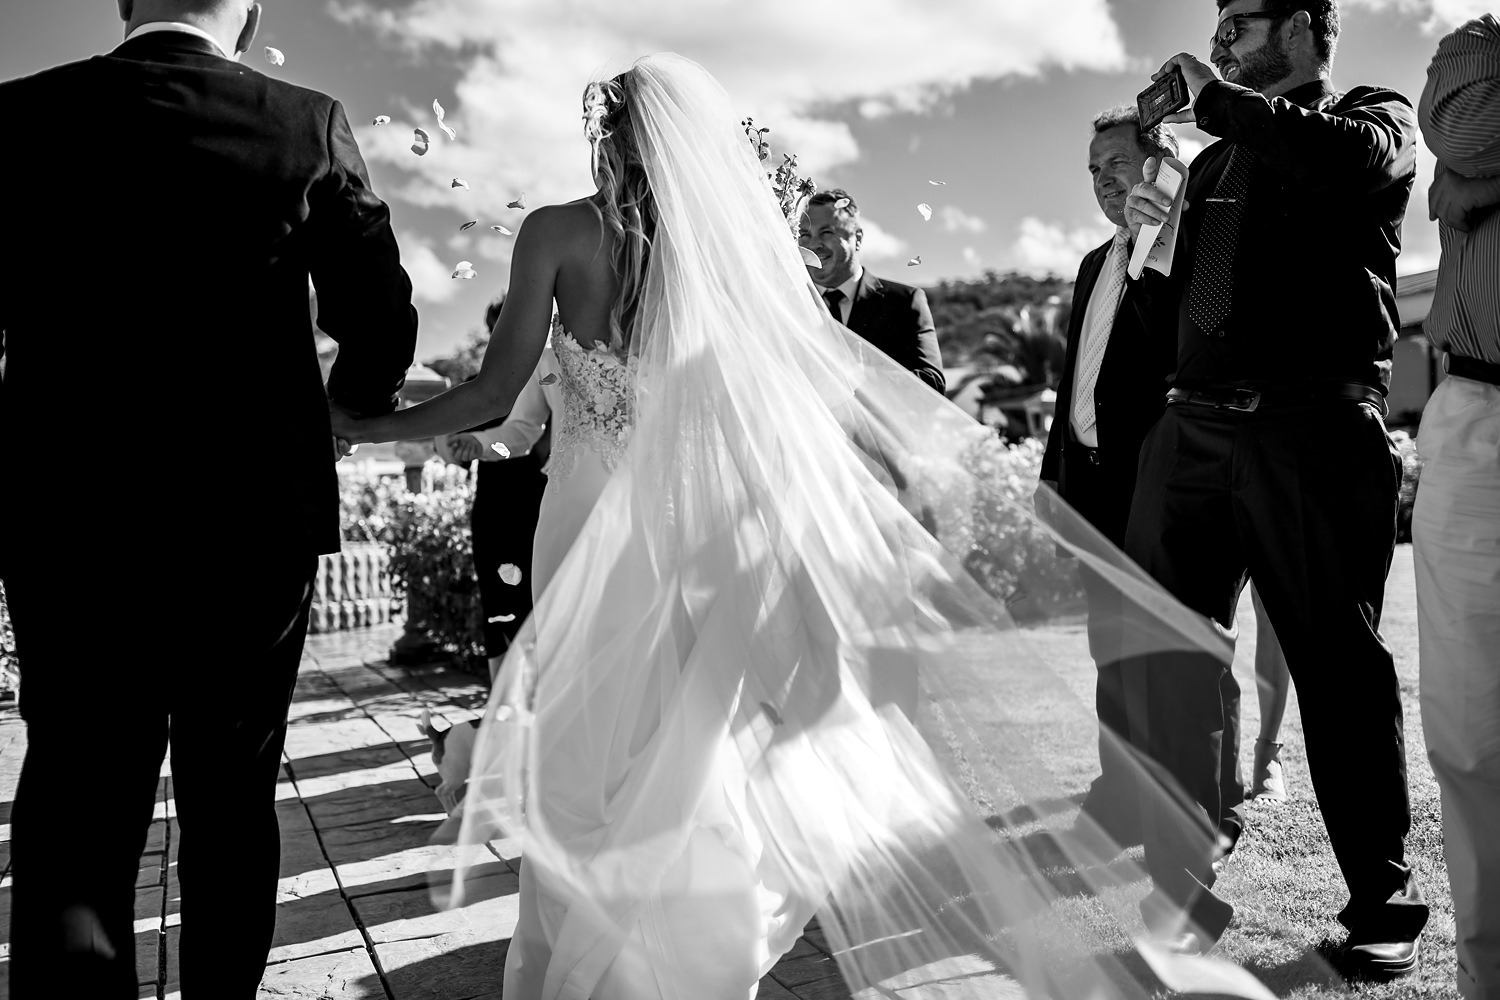 The bride's veil trails out after her as she makes her way down the line of guests throwing confetti